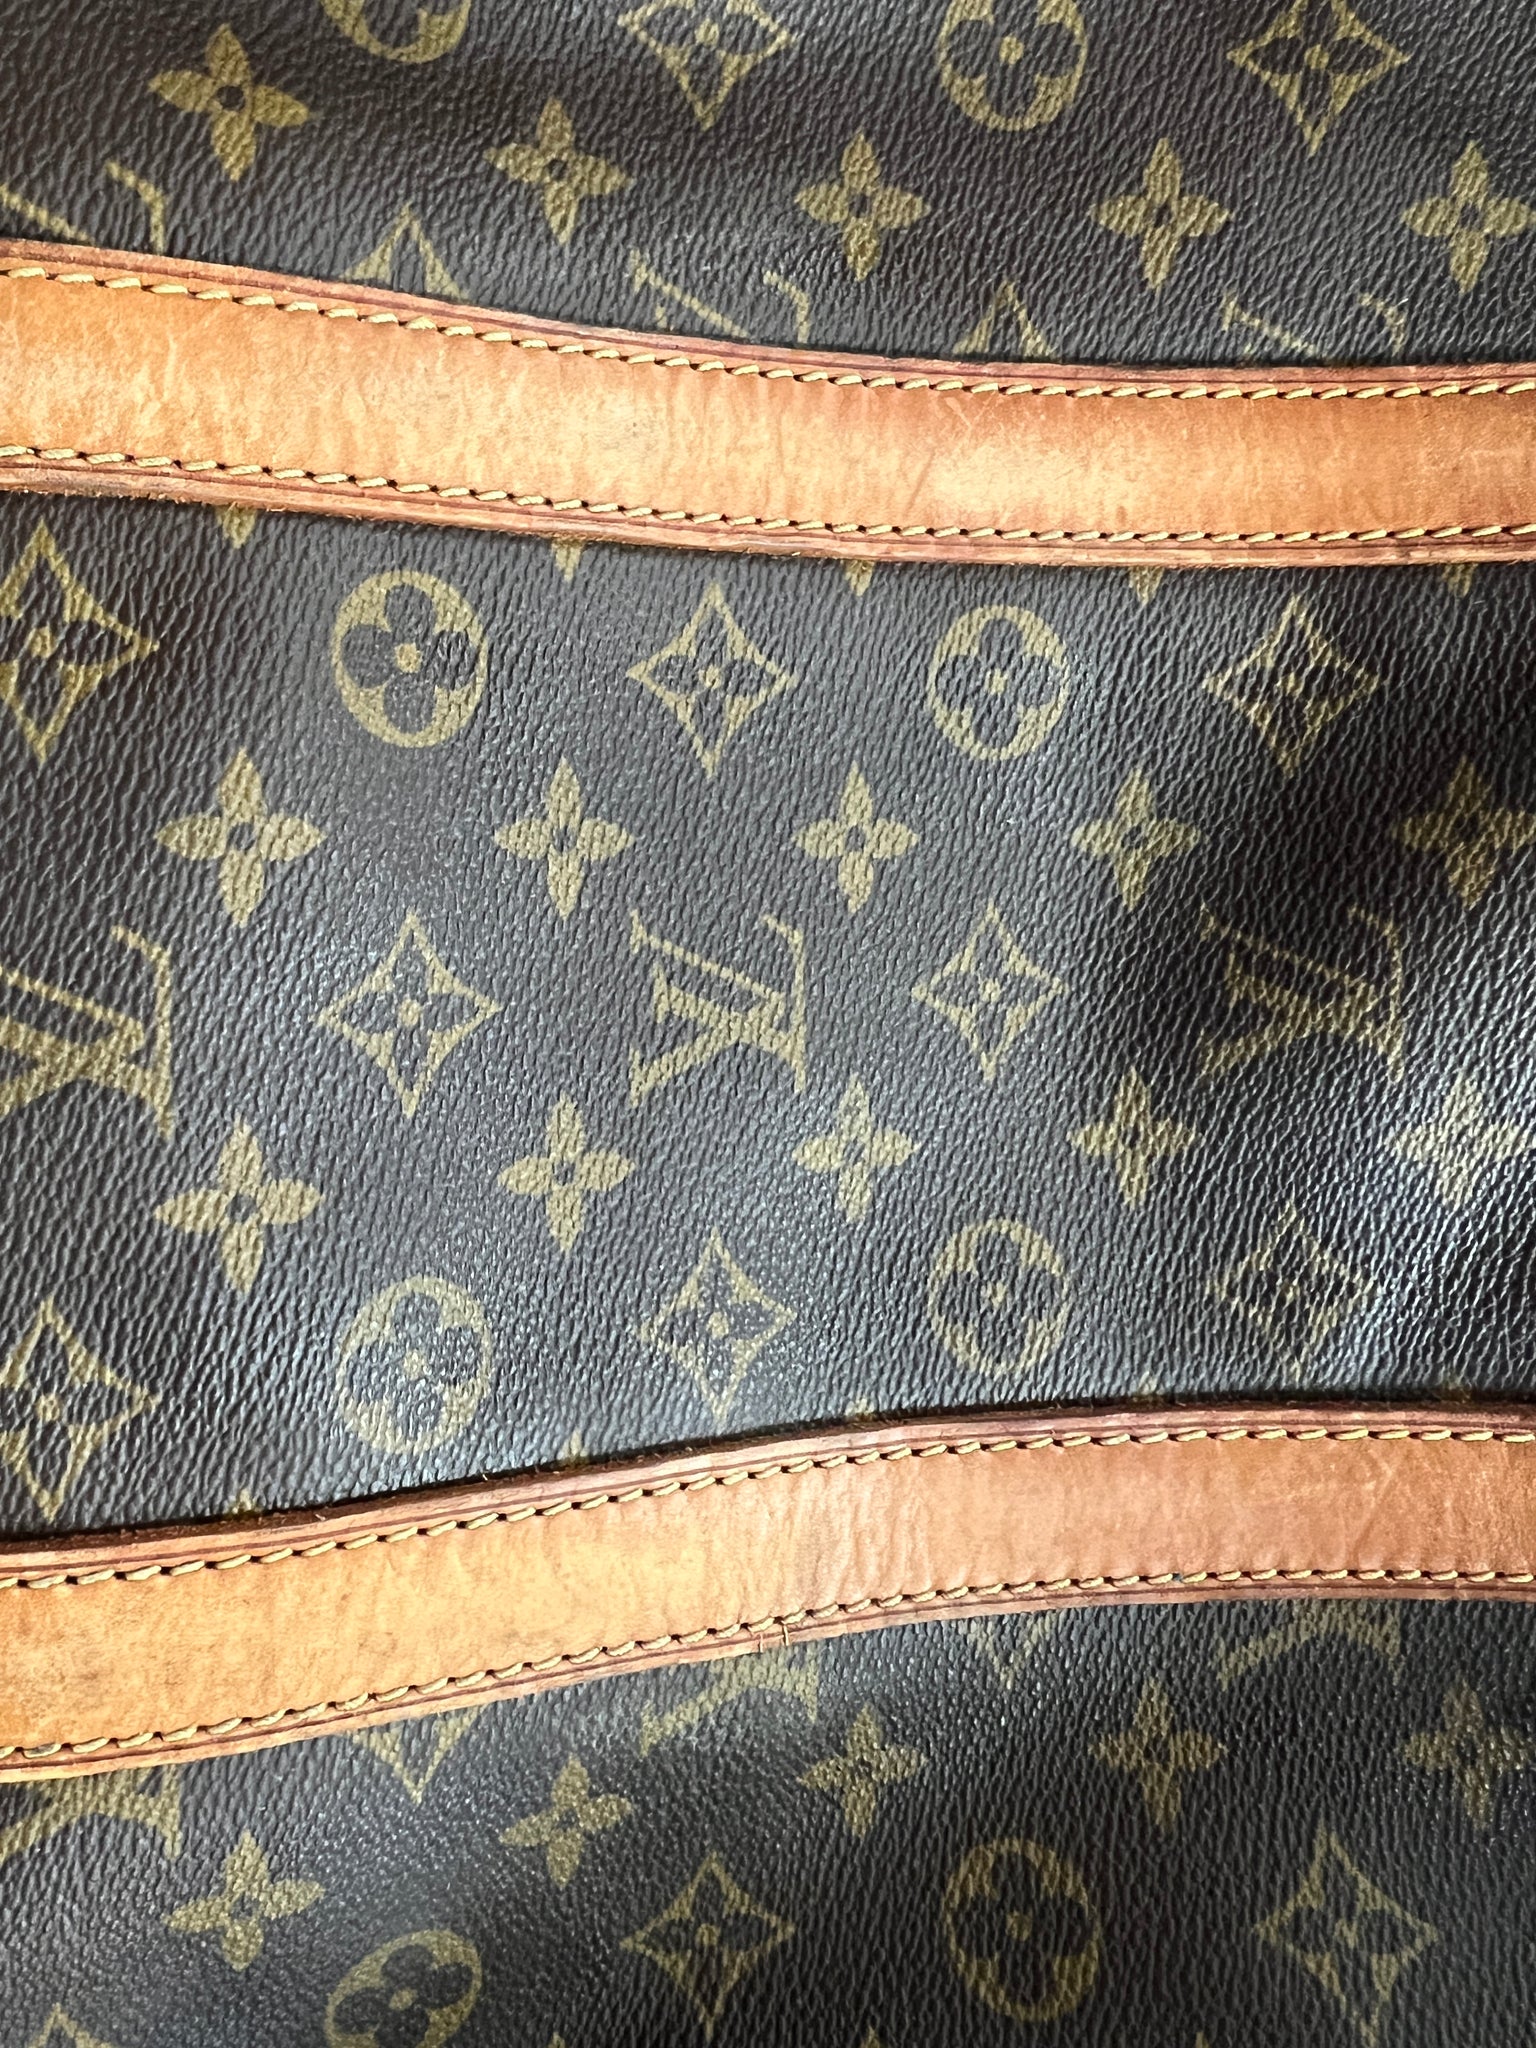 travel necessity! previously owned designer keepall 55 $1100 CALL